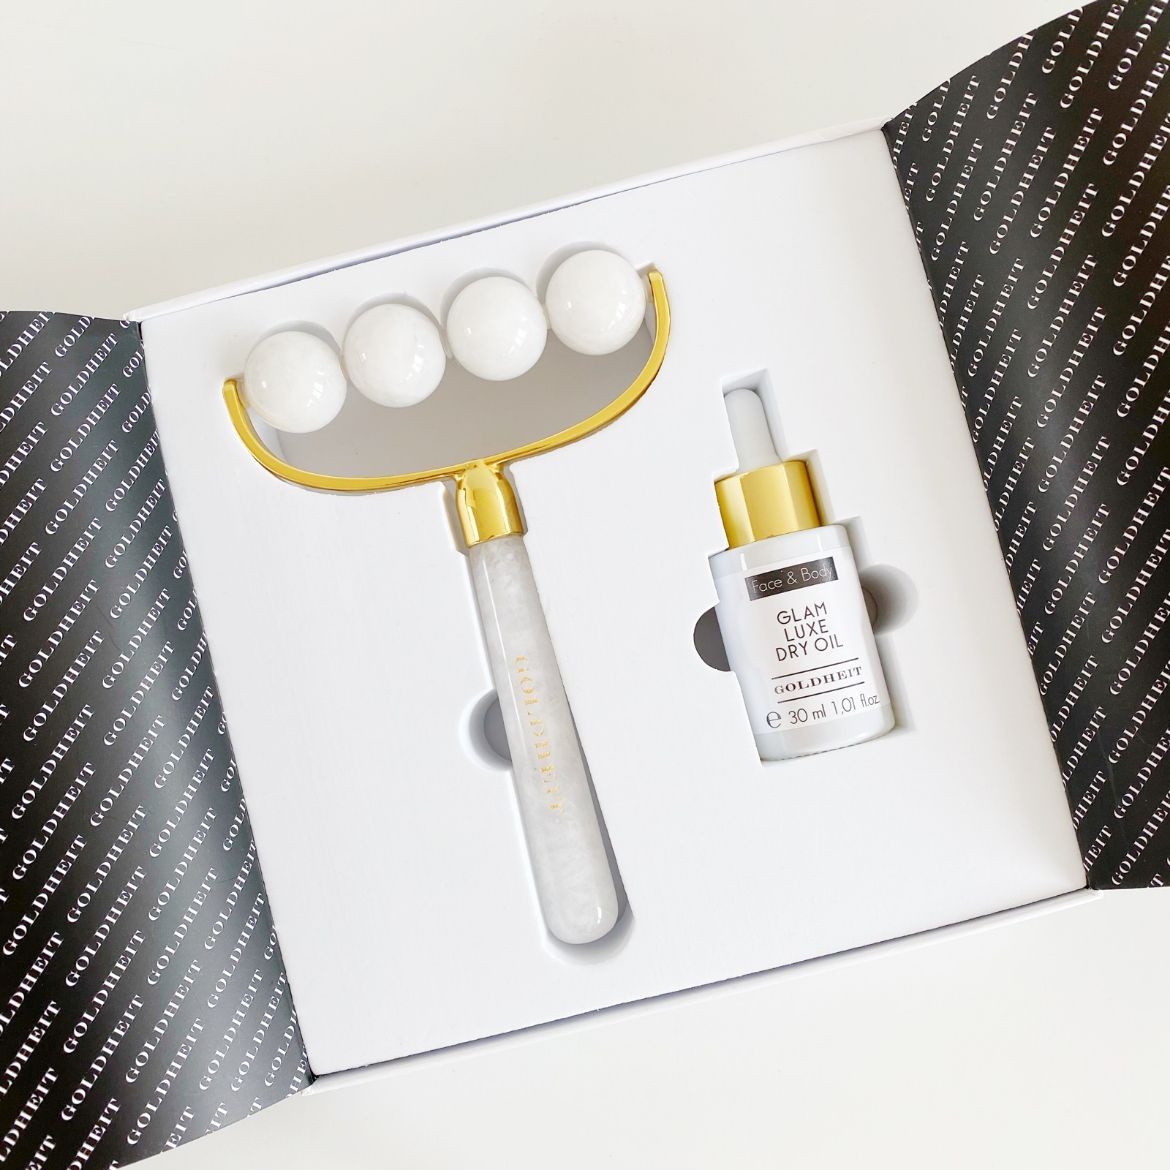 Image of Goldheit Body Luxe Set